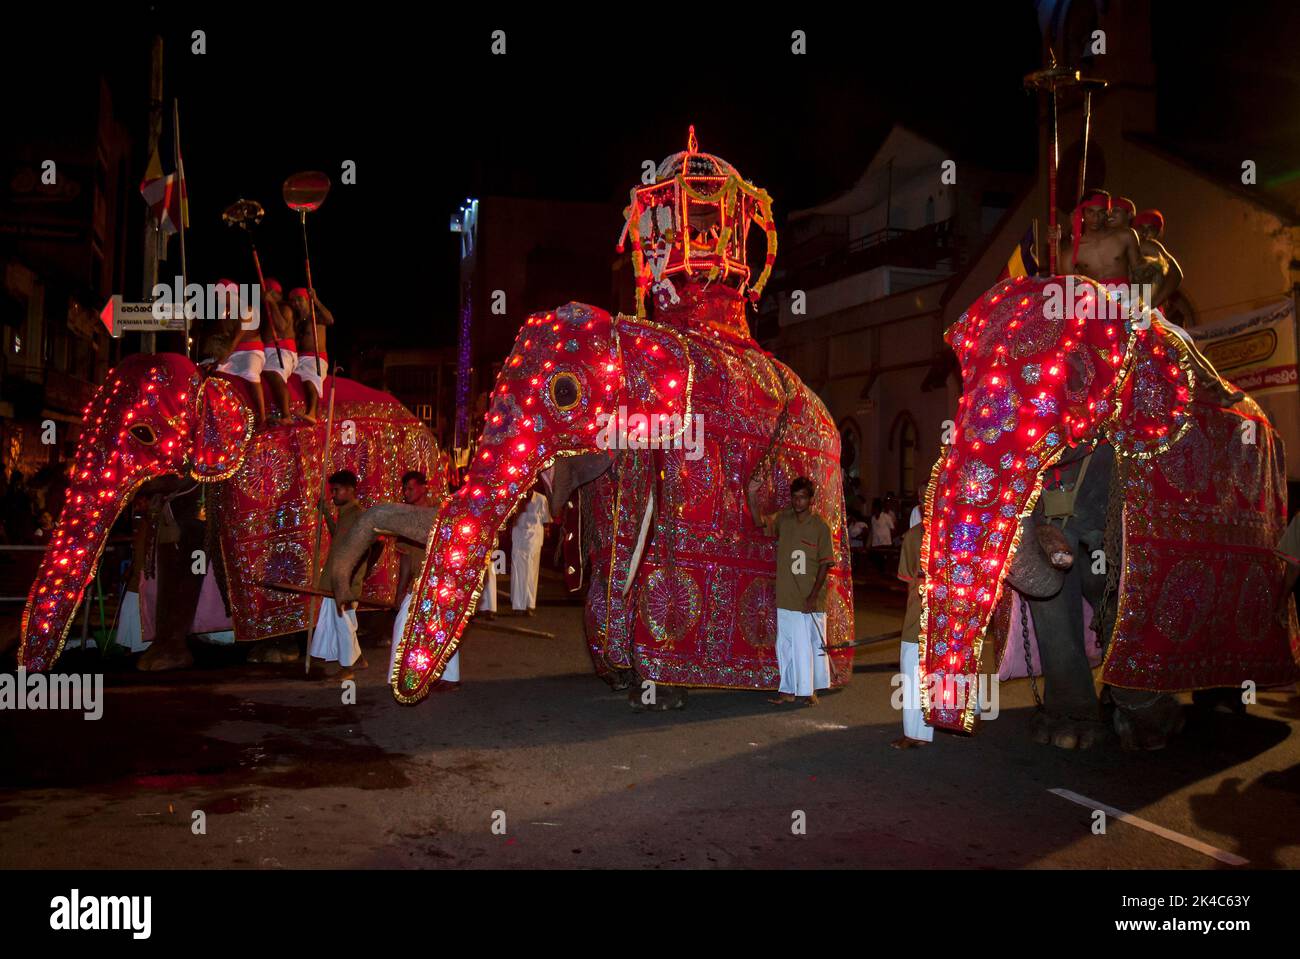 KANDY, SRI LANKA - AUGUST 25, 2015 : A trio of ceremonlal elephants parade through the streets of Kandy in Sri Lanka during the Buddhist Esala Peraher Stock Photo